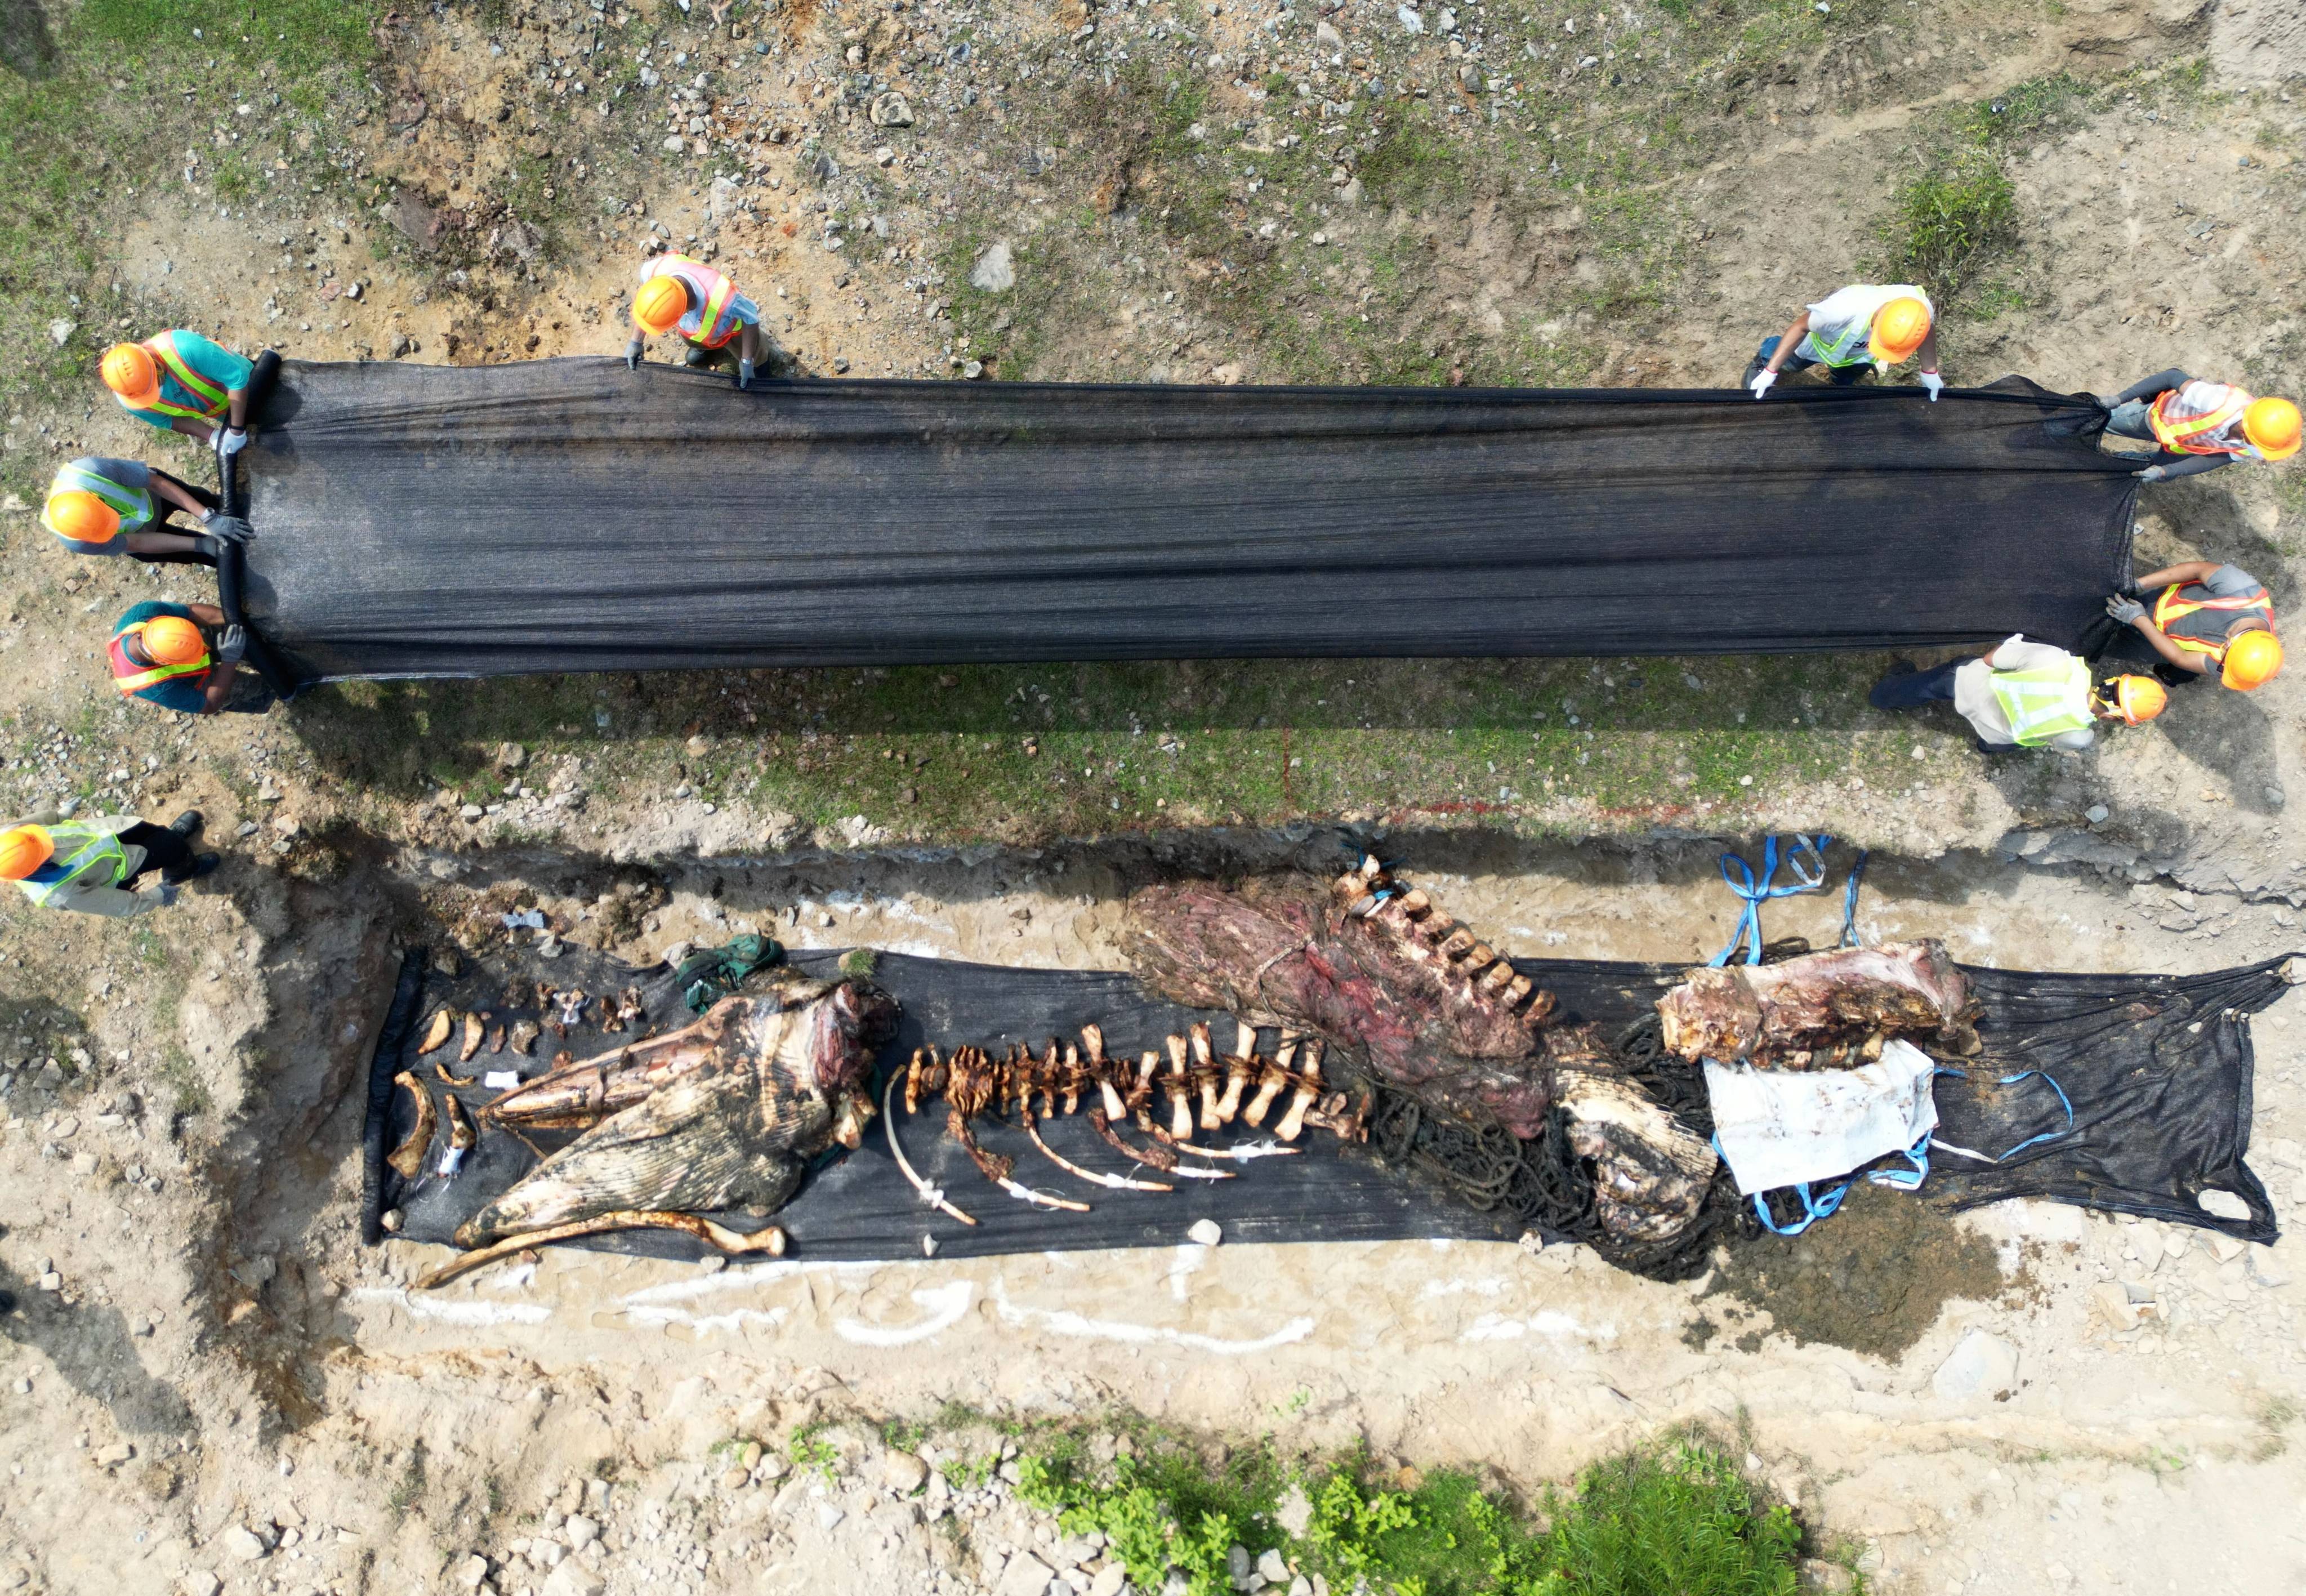 The whale was found dead off Shelter Island in Sai Kung on July 31 with its body then transported to High Island Reservoir’s west dam. Photo: Sam Tsang